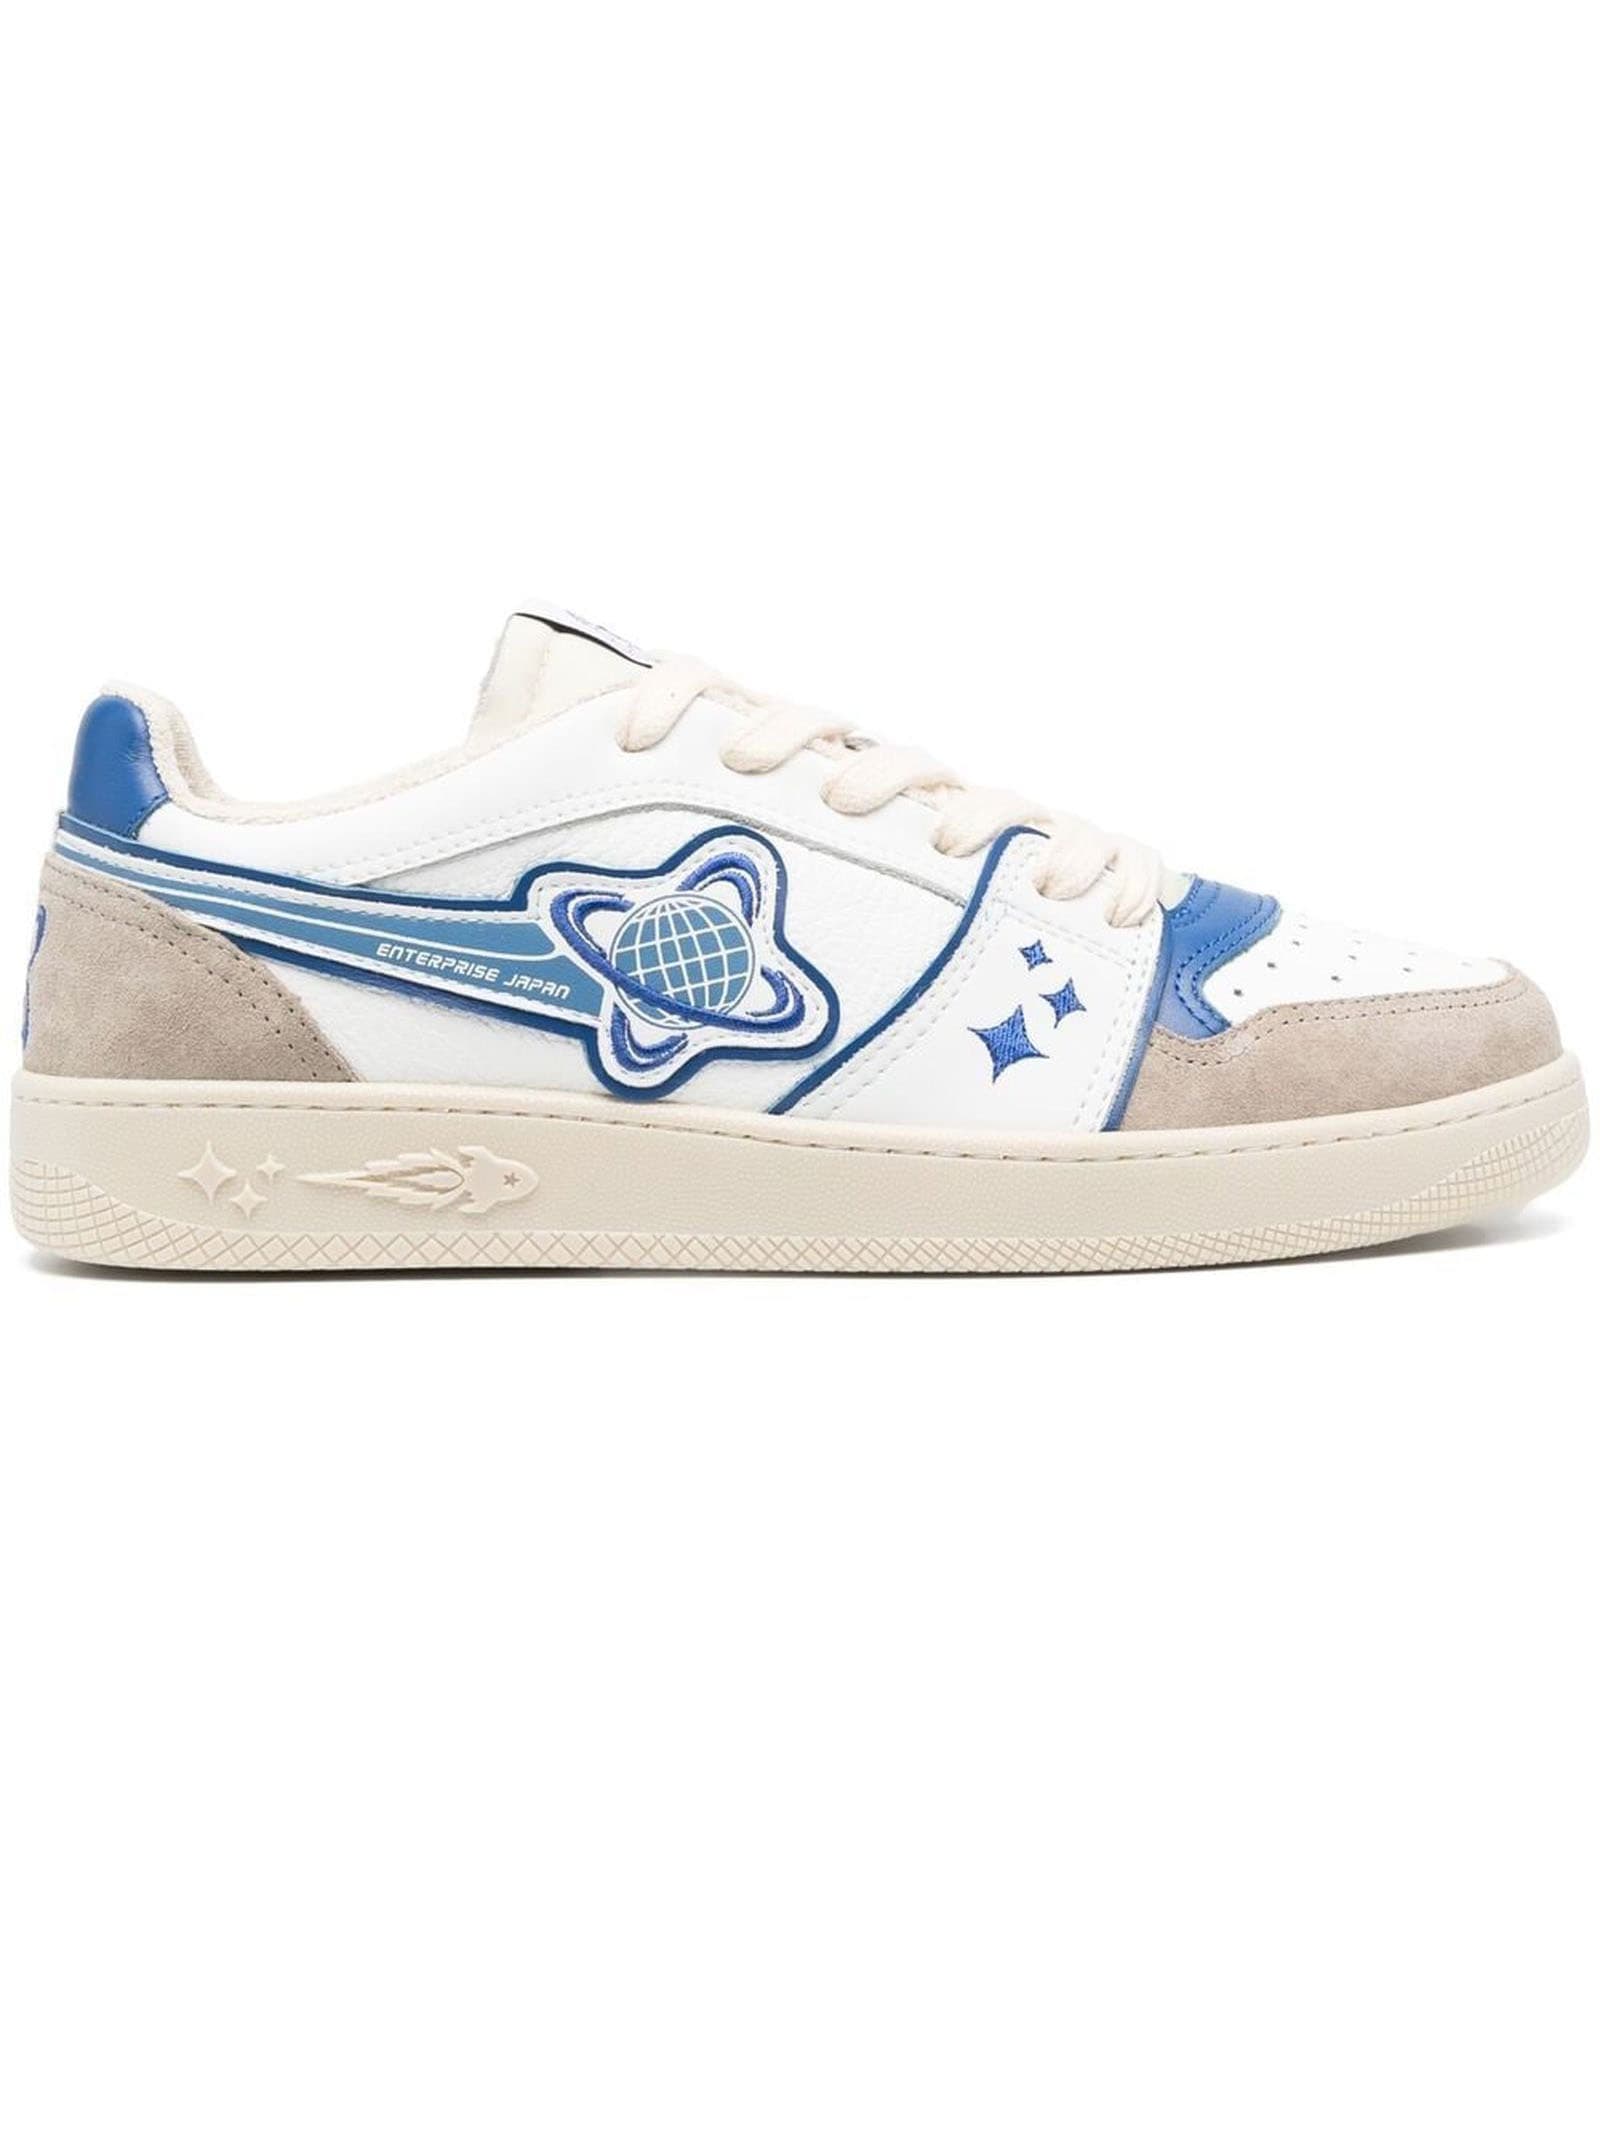 Enterprise Japan White And Blue Leather Sneakers